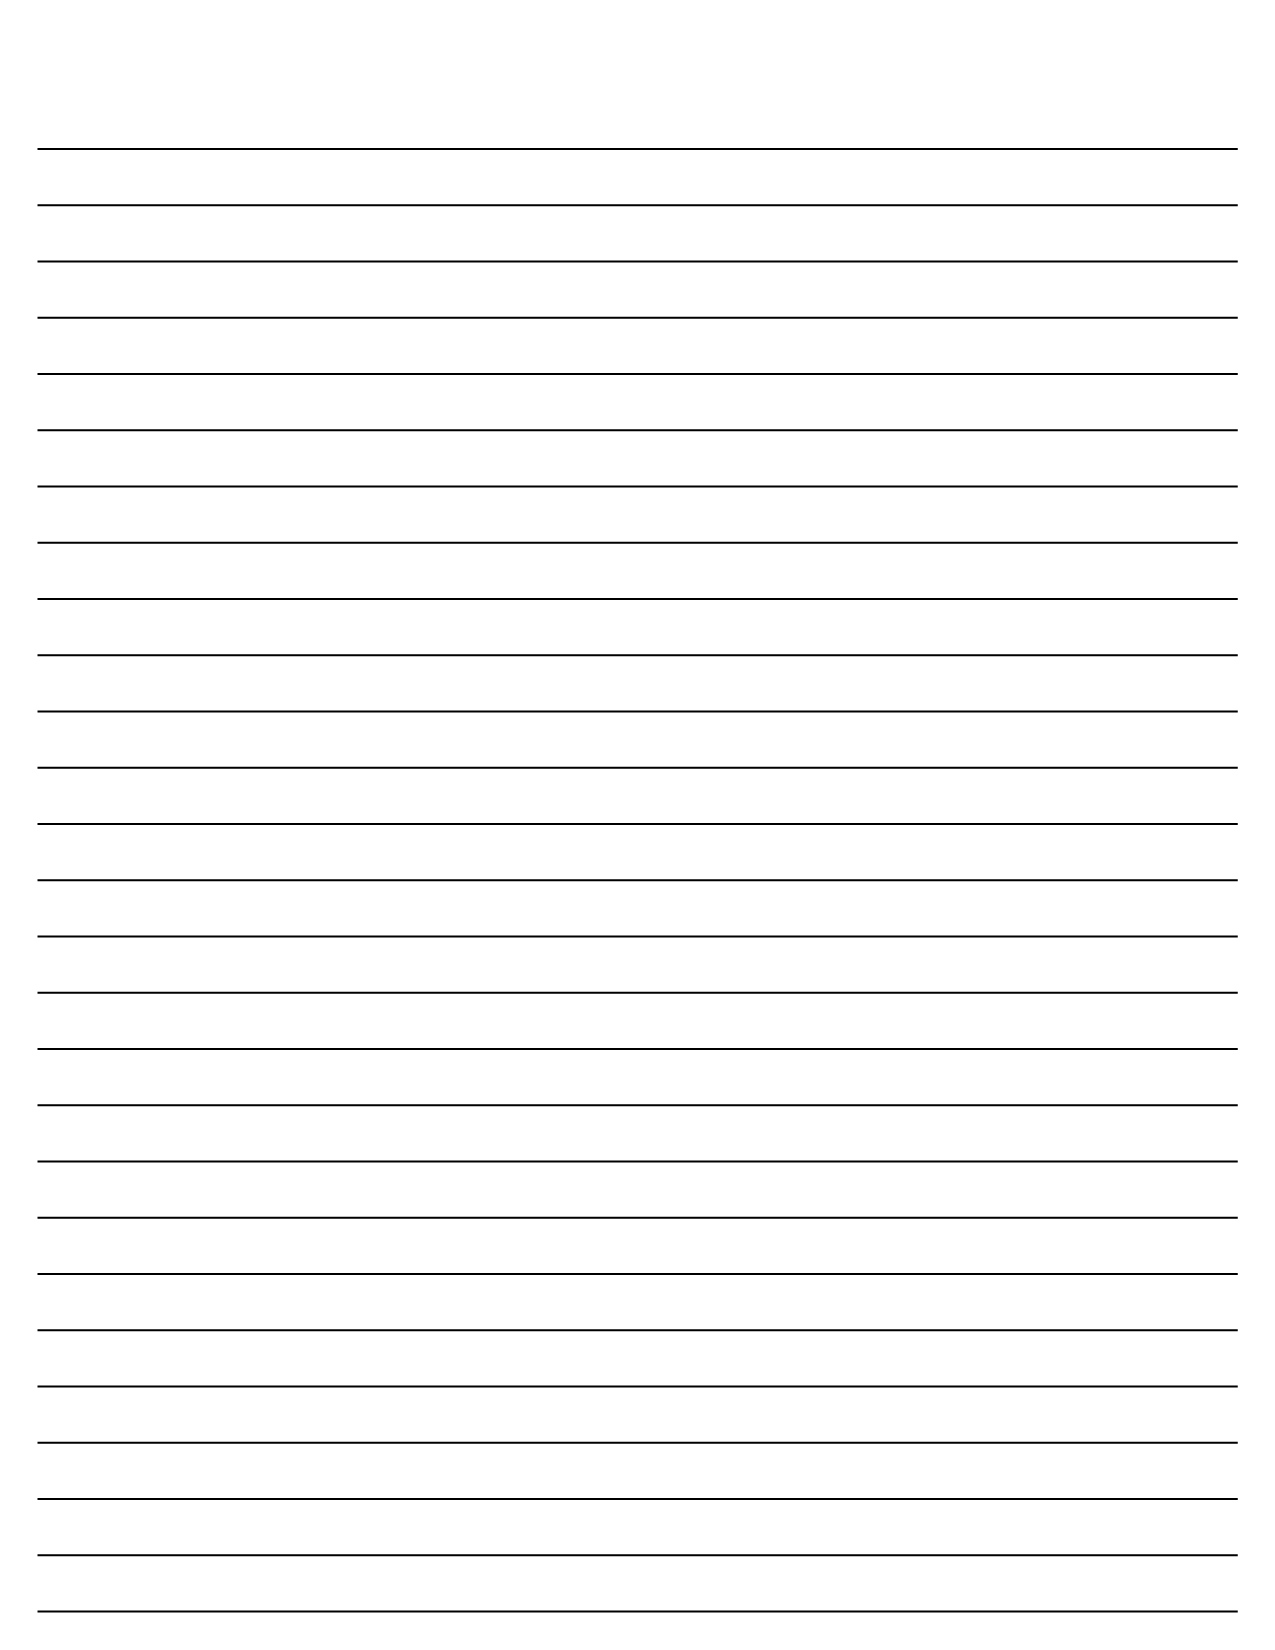 Printable Lined Pages Free